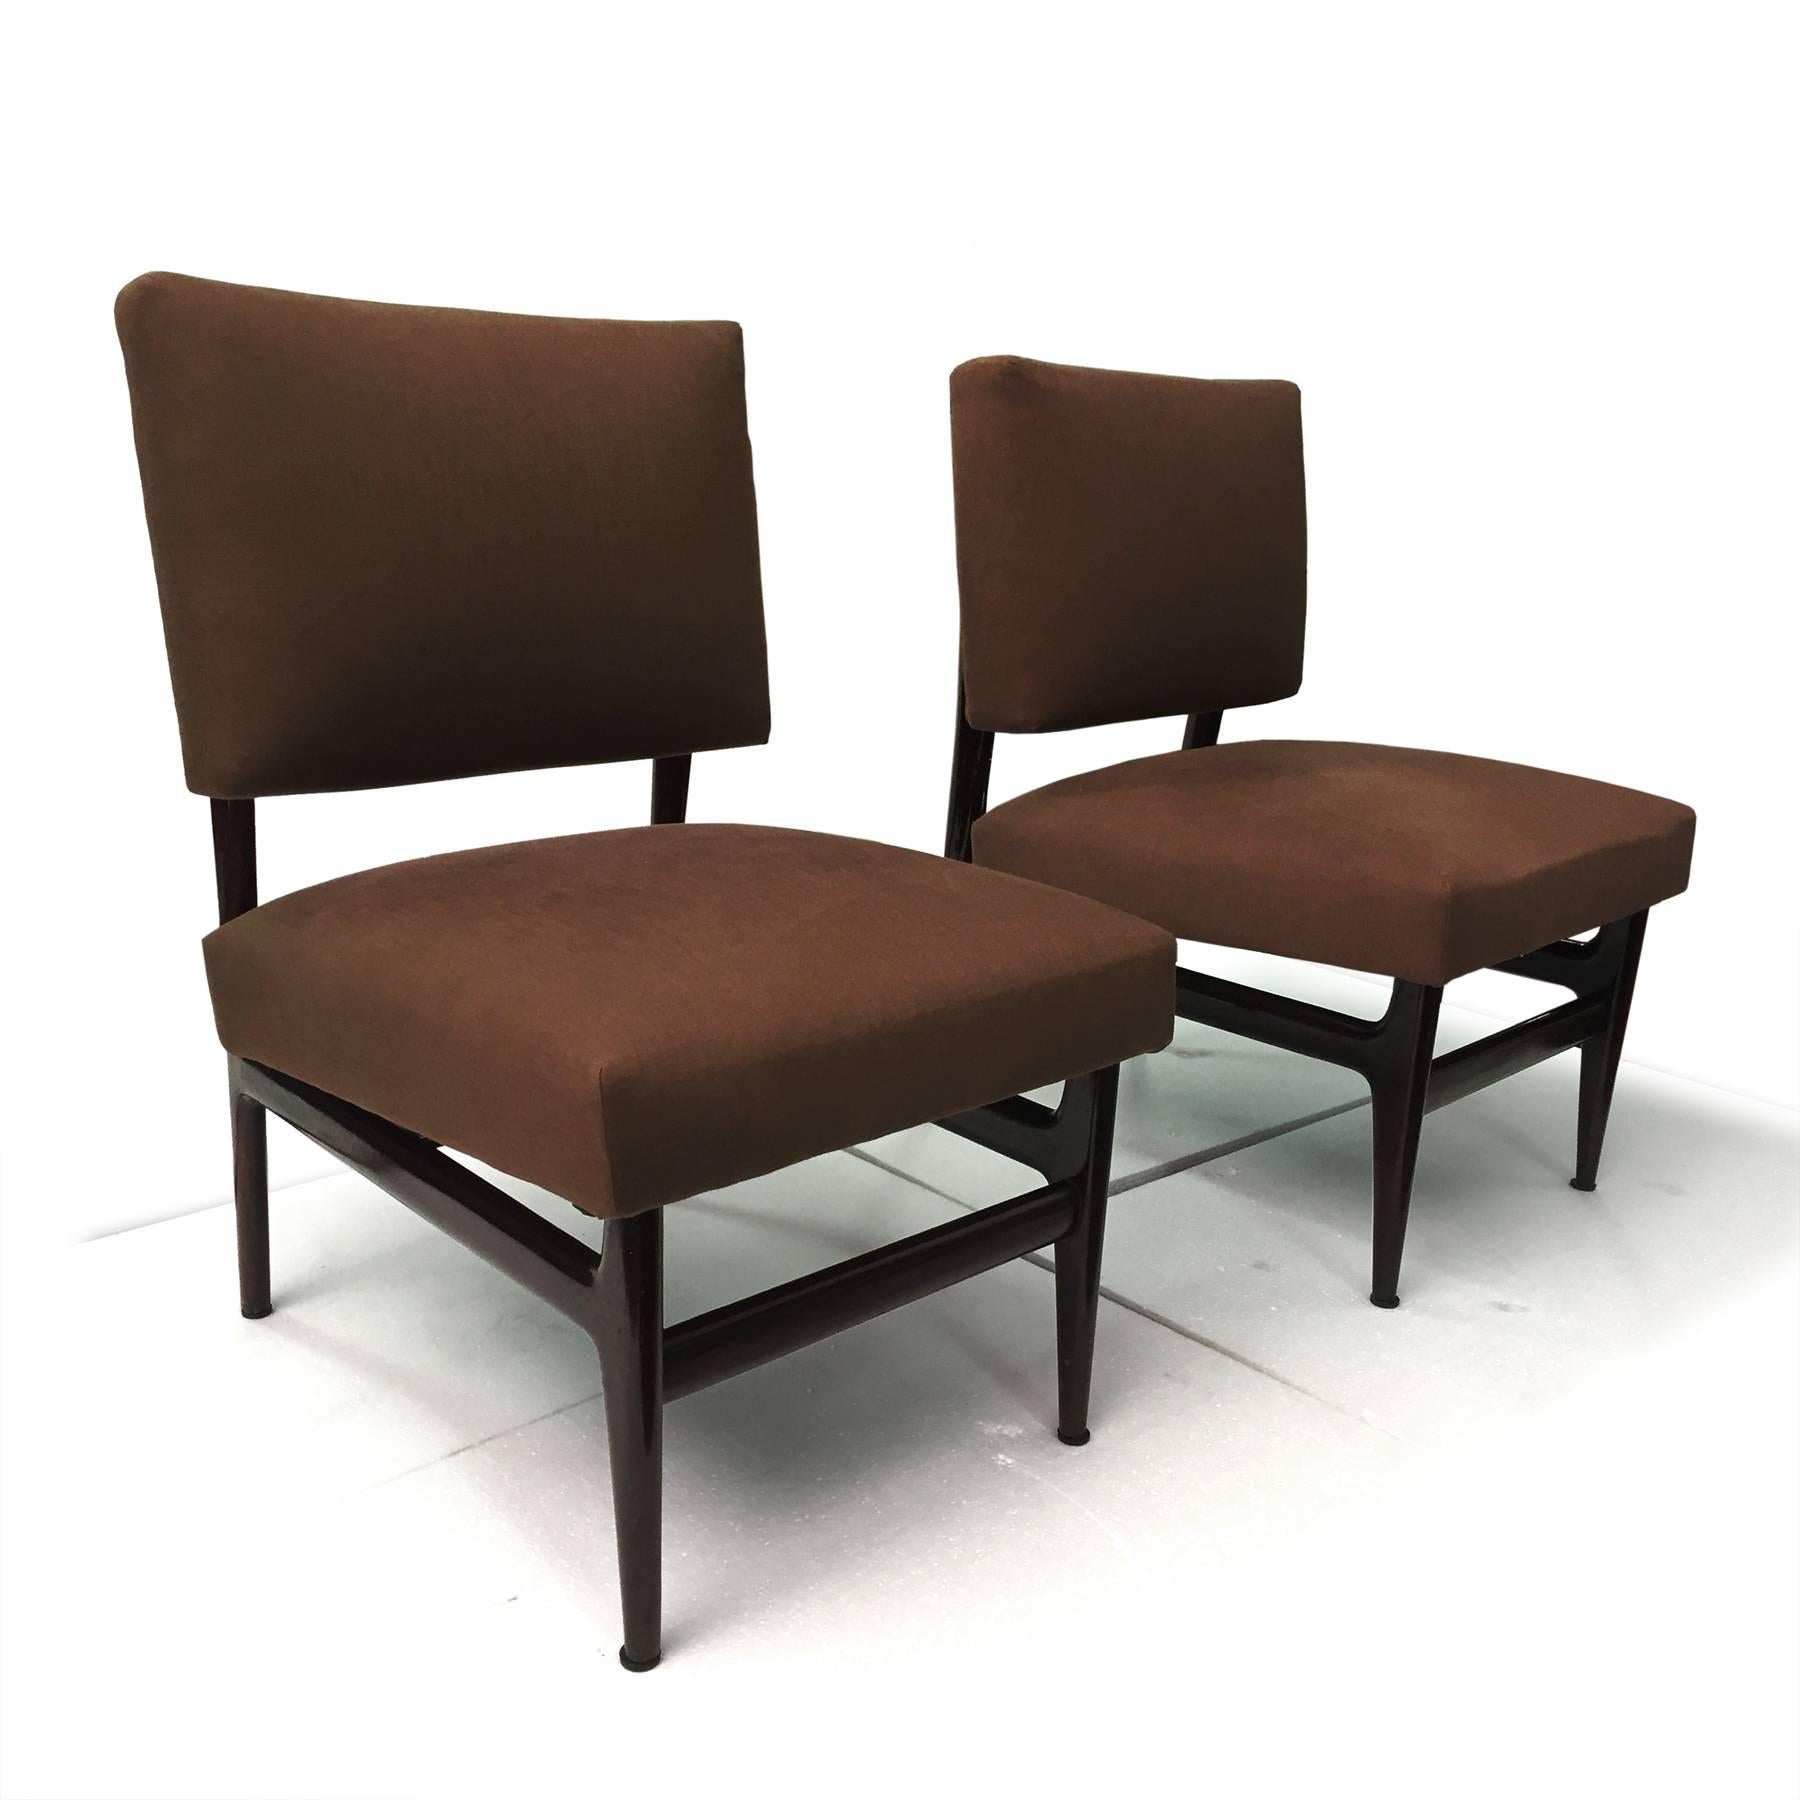 Very elegant and comfortable pair of Italian armchairs, designed and manufactured by Vittorio Dassi in 1950s.
The seats are covered in brown cotton fabric, in excellent conditions of the period without damages and or fabric rips, as well the springs